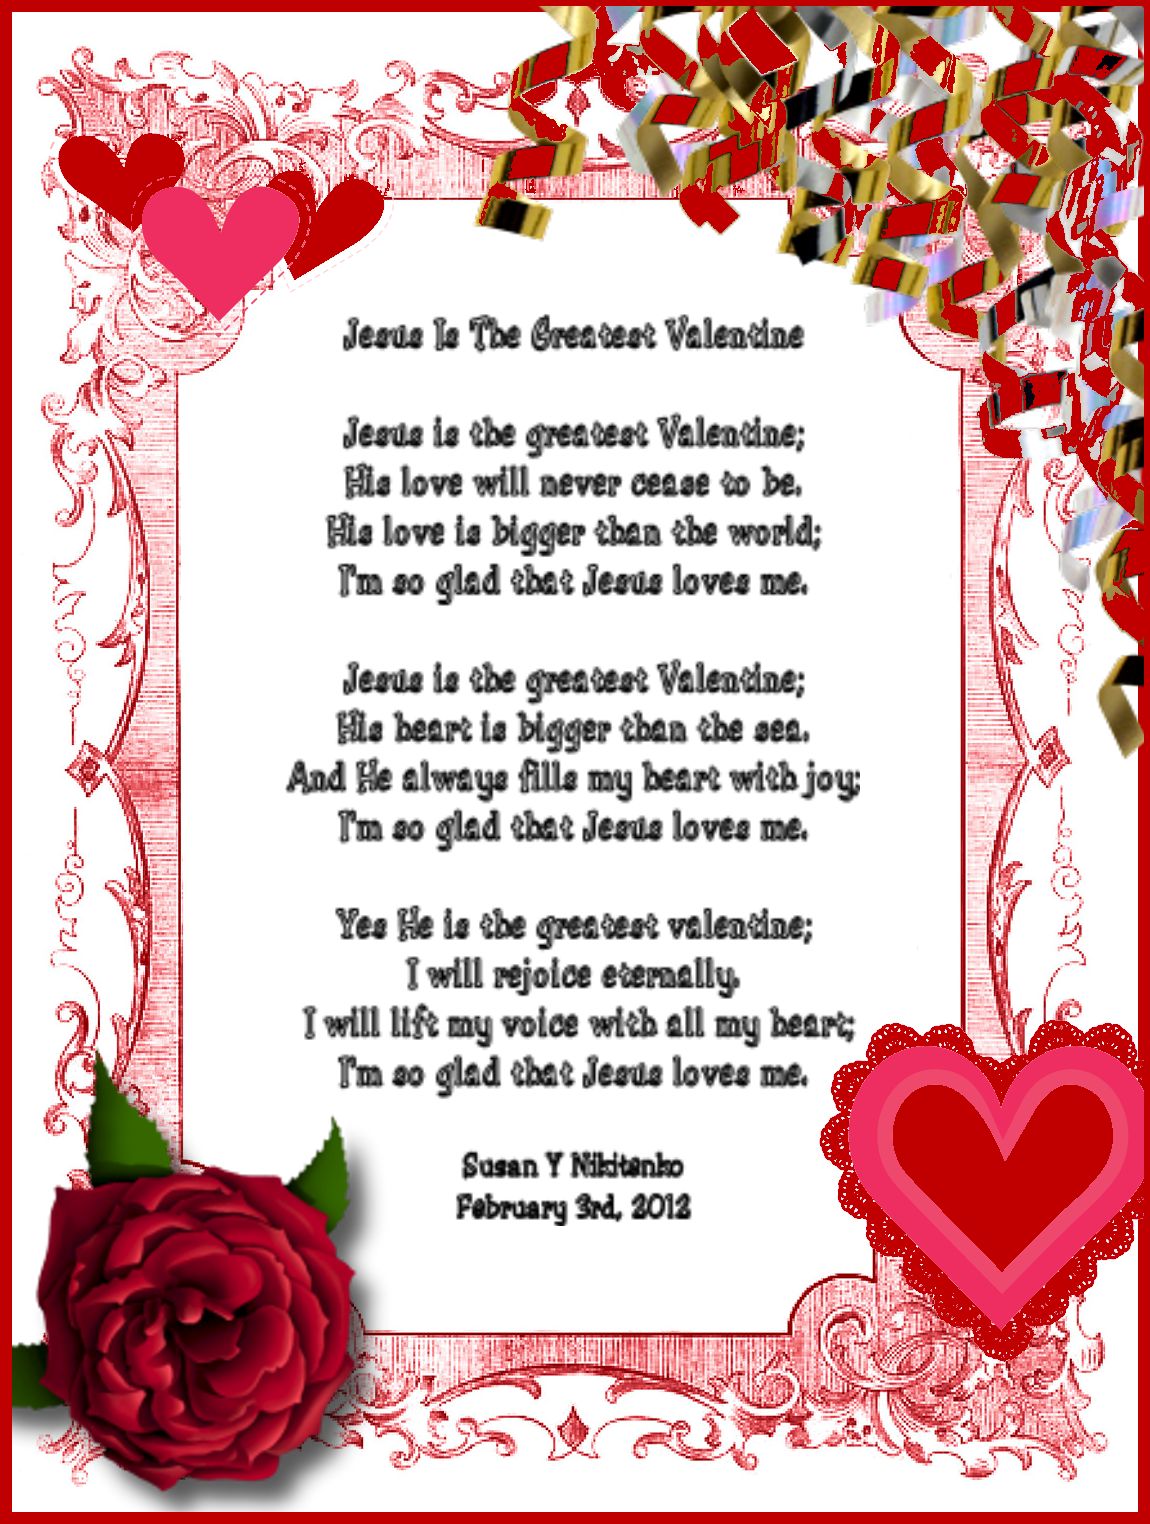 Christian Images In My Treasure Box: Jesus IsThe Greatest Valentine - Poem Poster